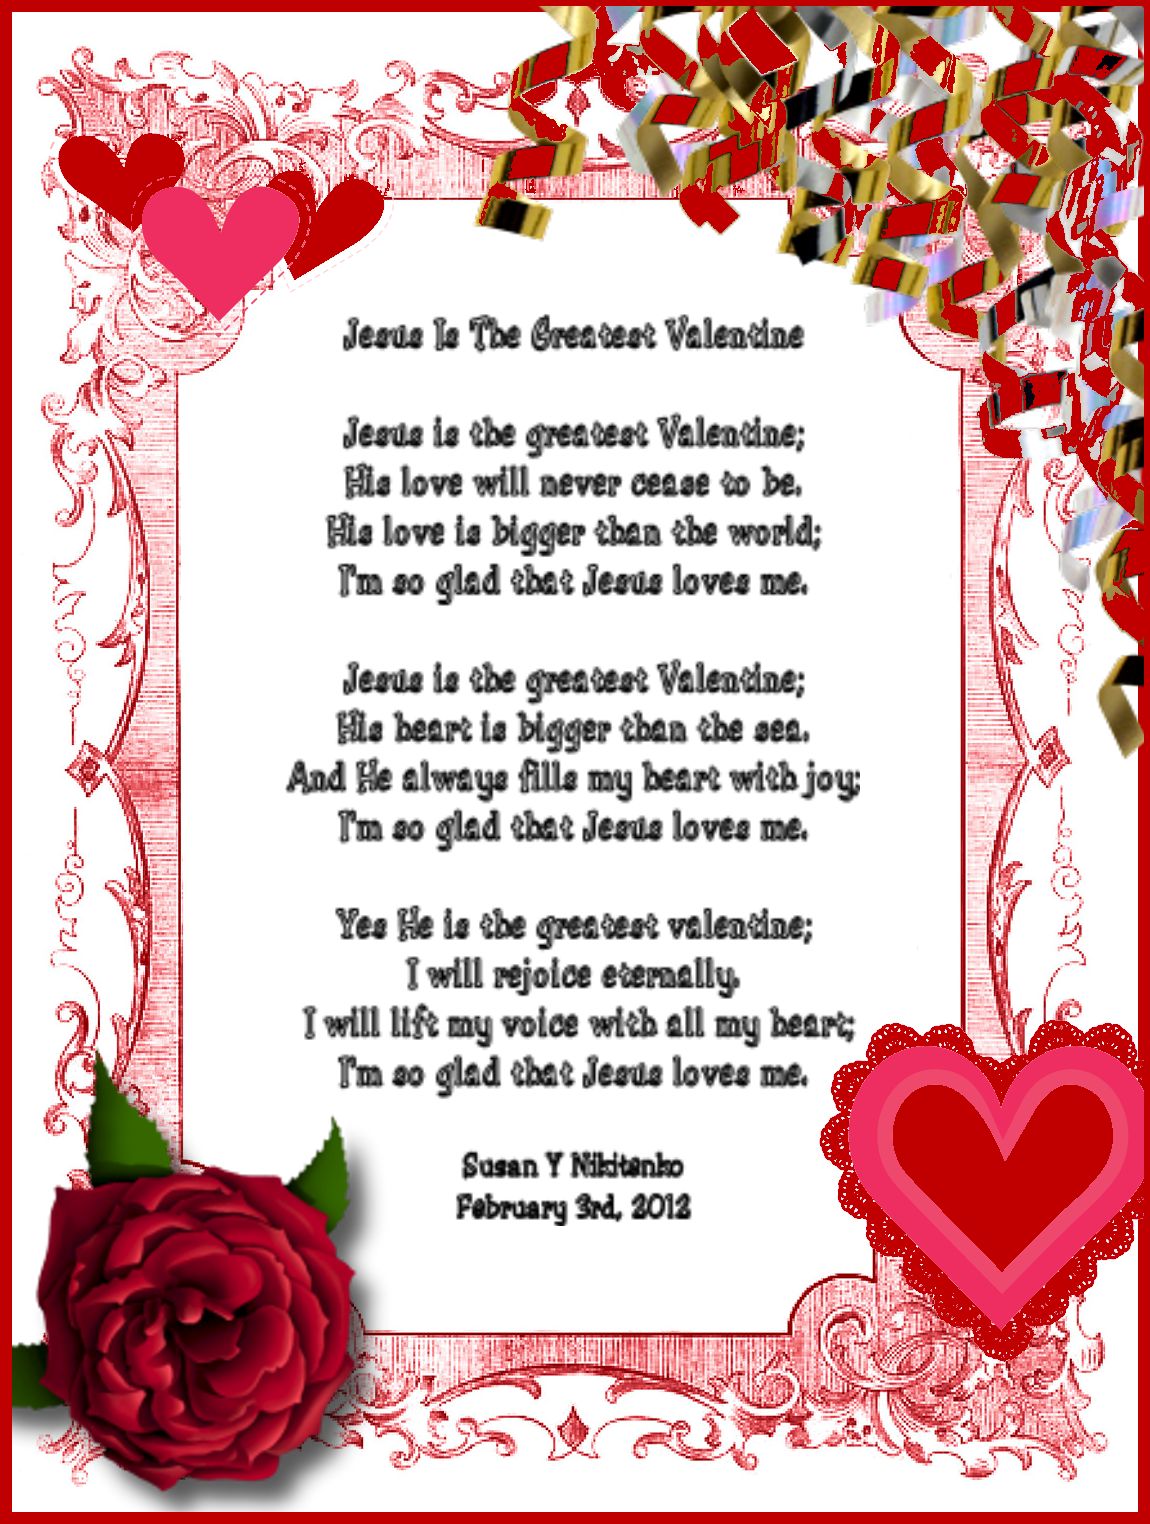 Christian Images In My Treasure Box: Jesus IsThe Greatest Valentine - Poem Poster